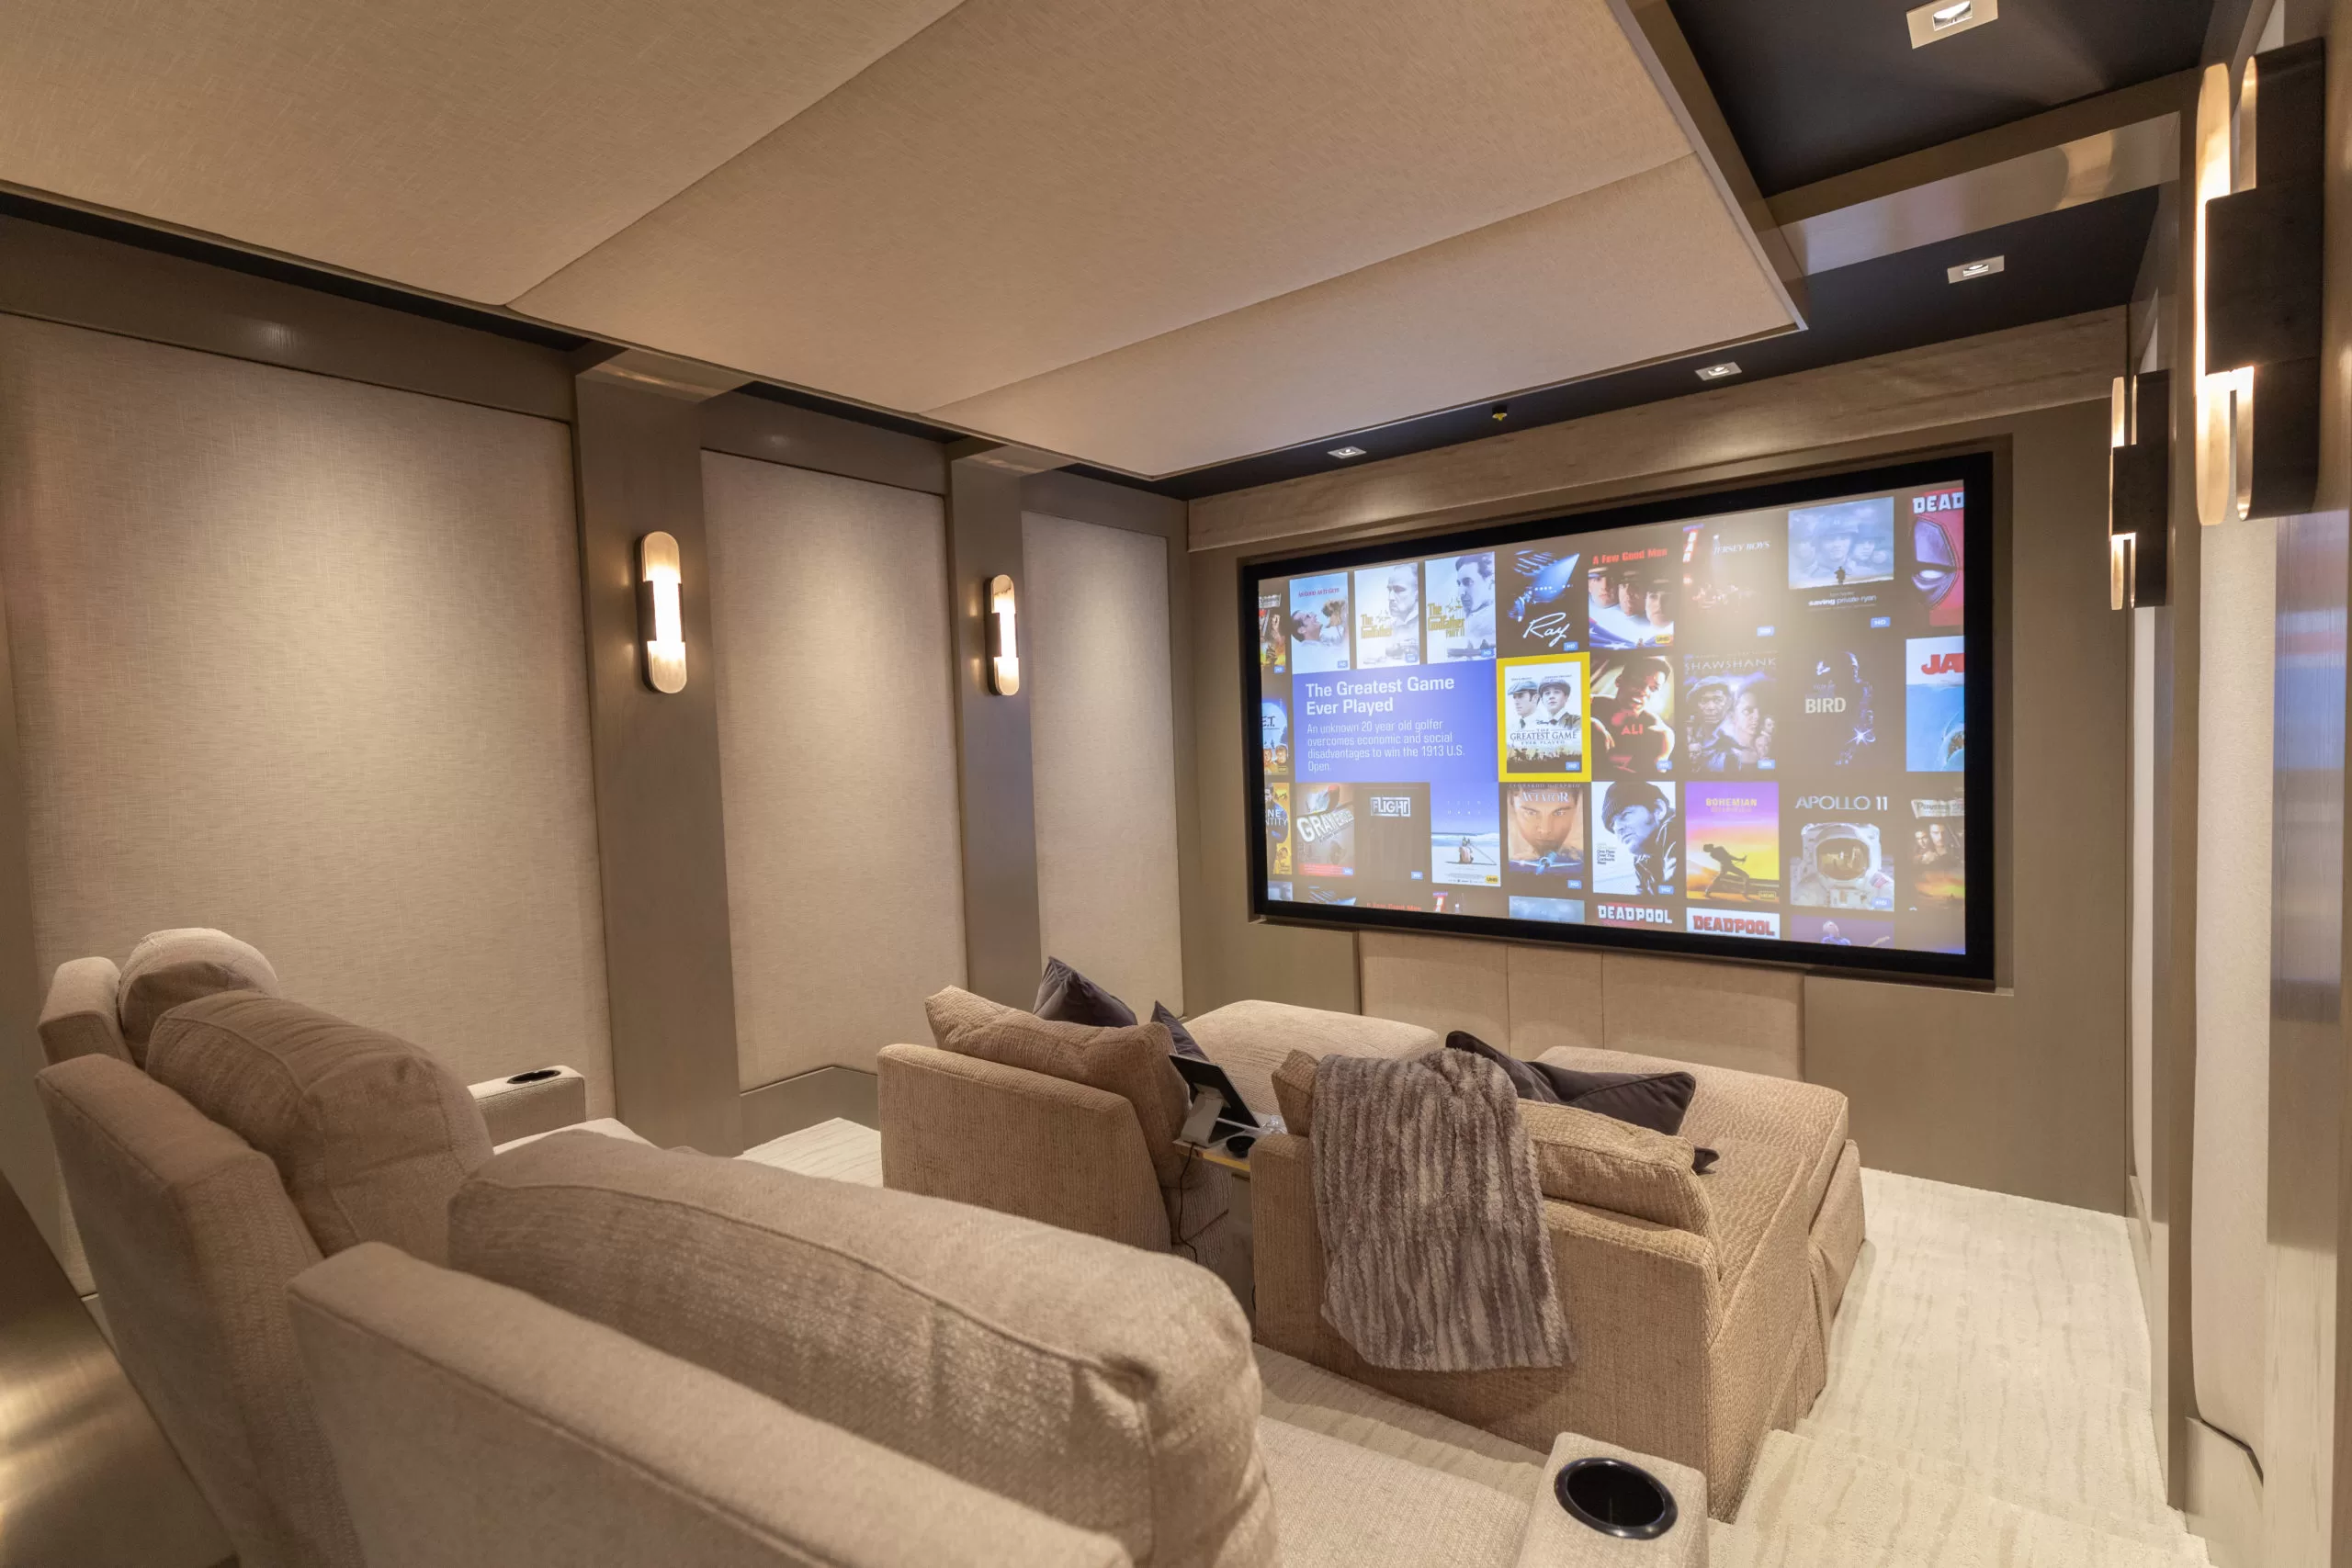 Movie room, ideas to implement when you have an empty nest 